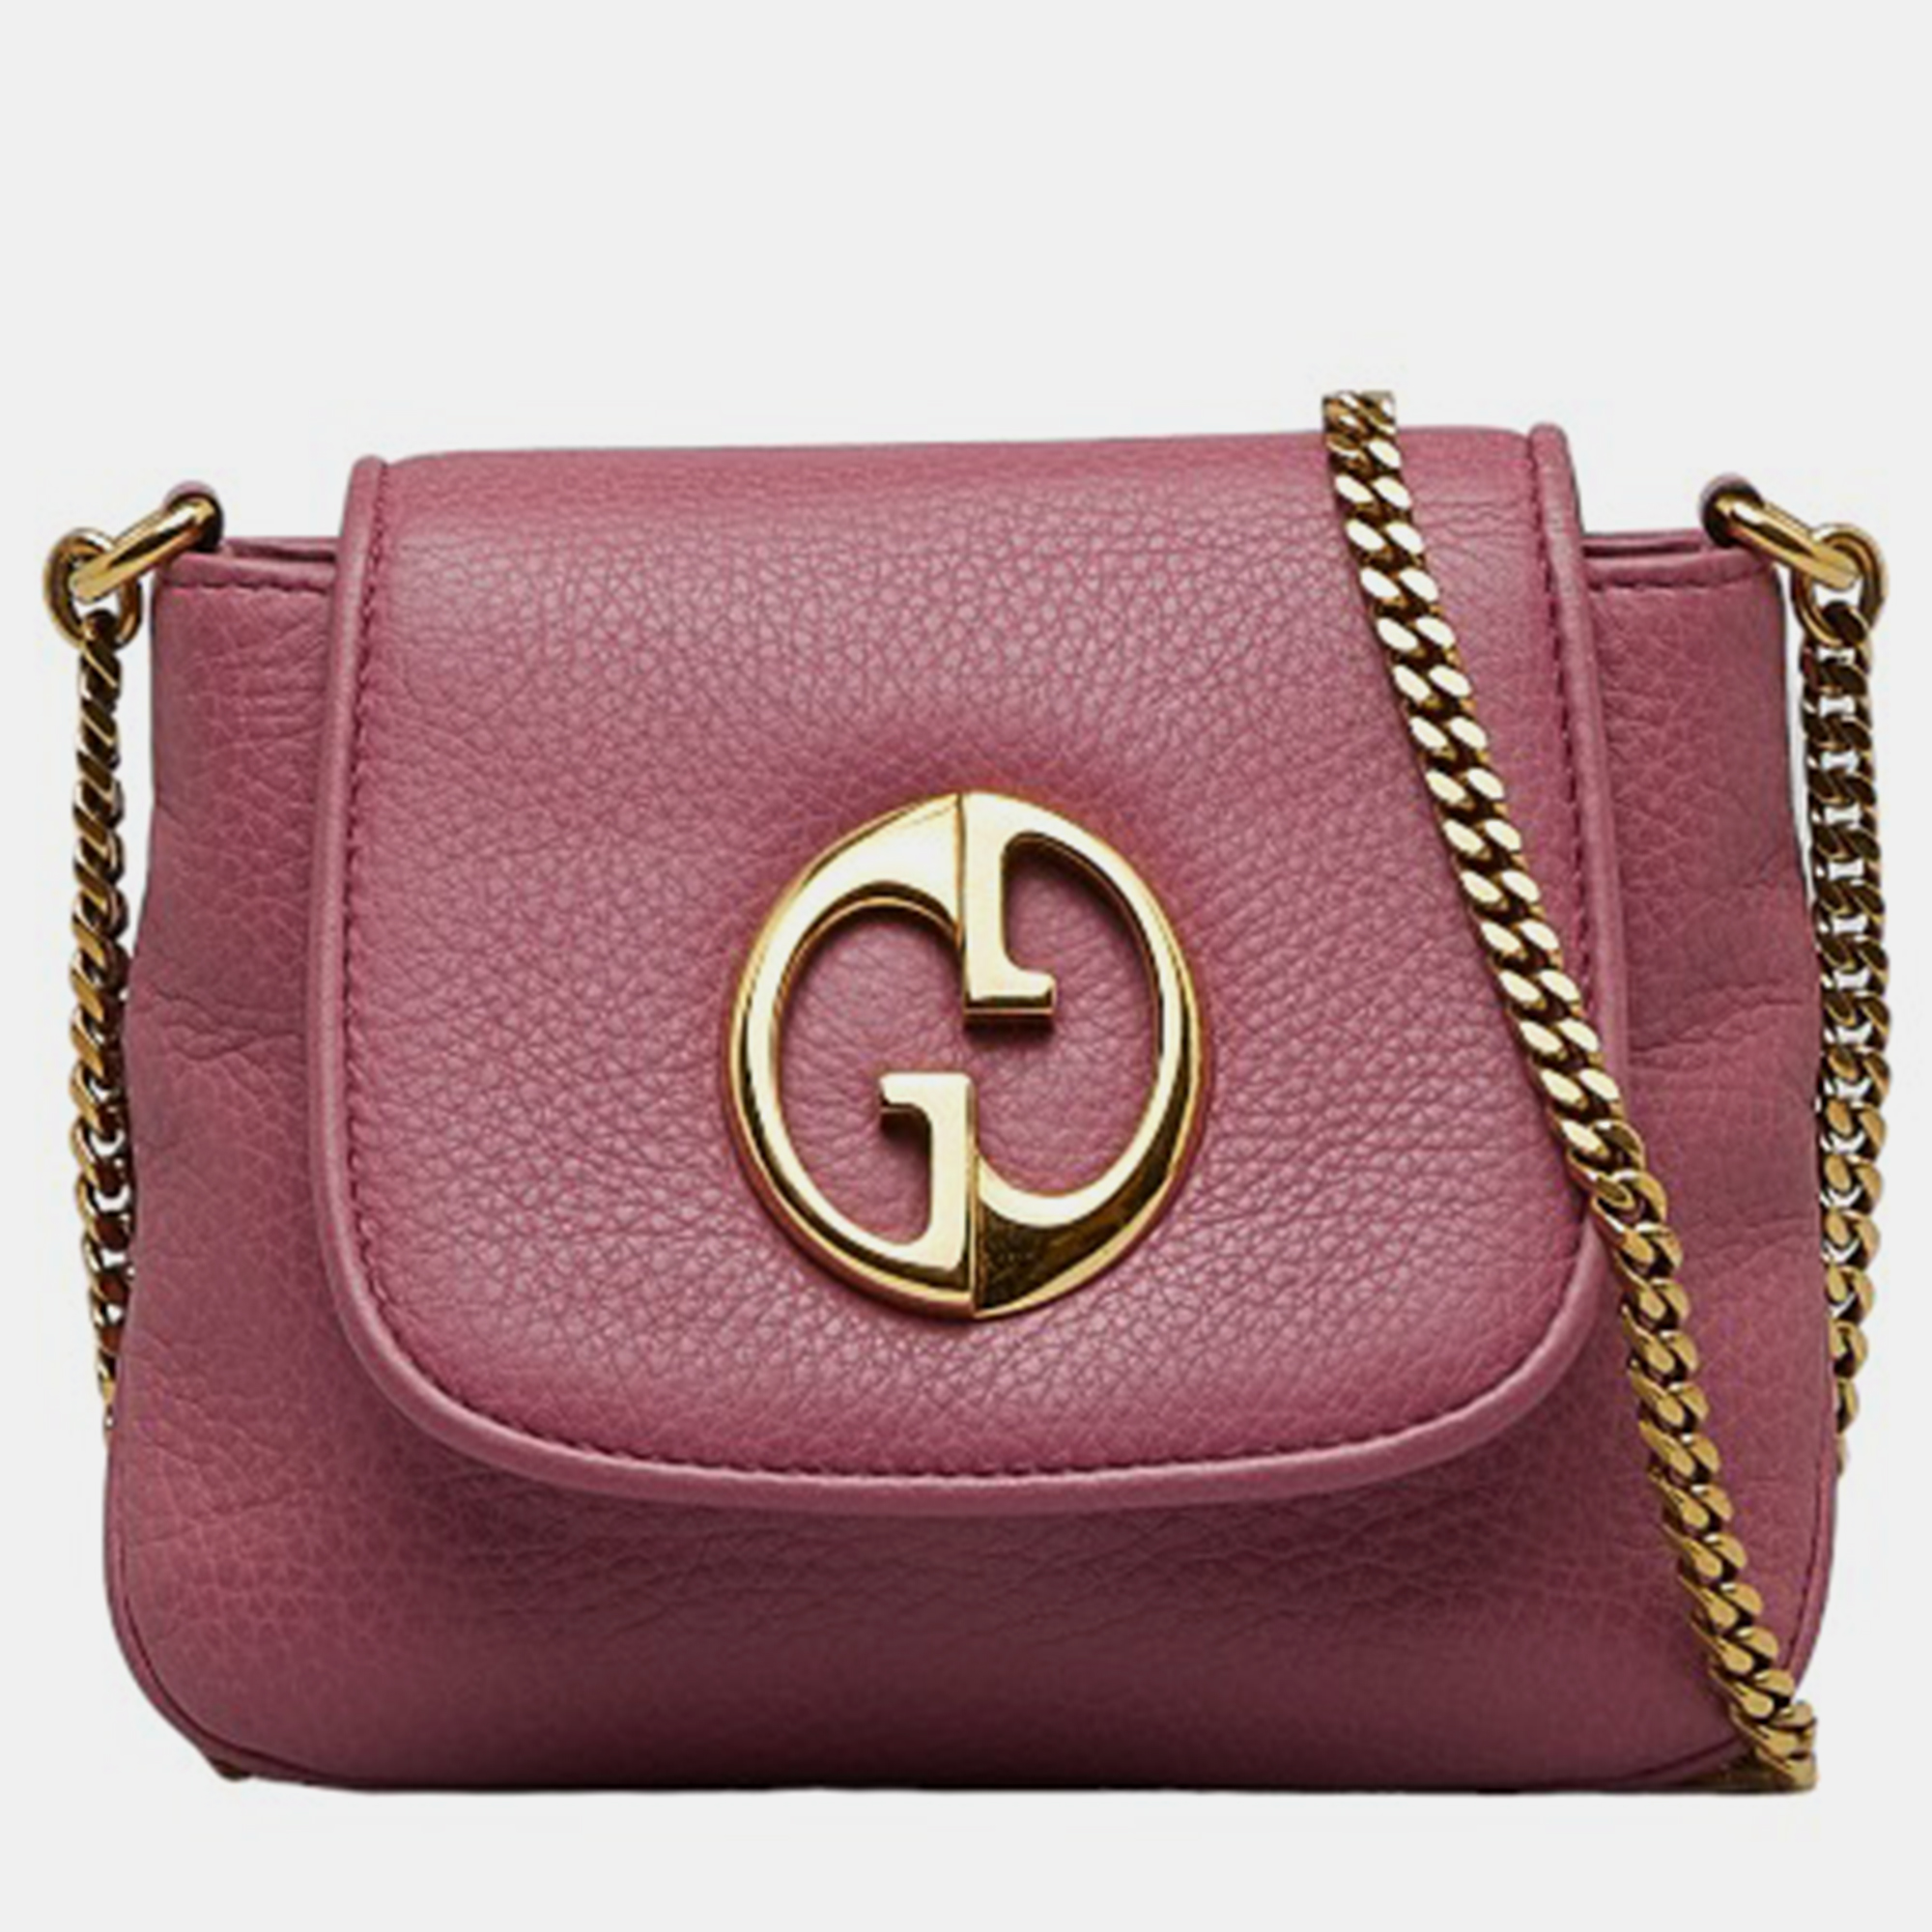 Gucci Pink Leather 1973 Chain Shoulder Bag